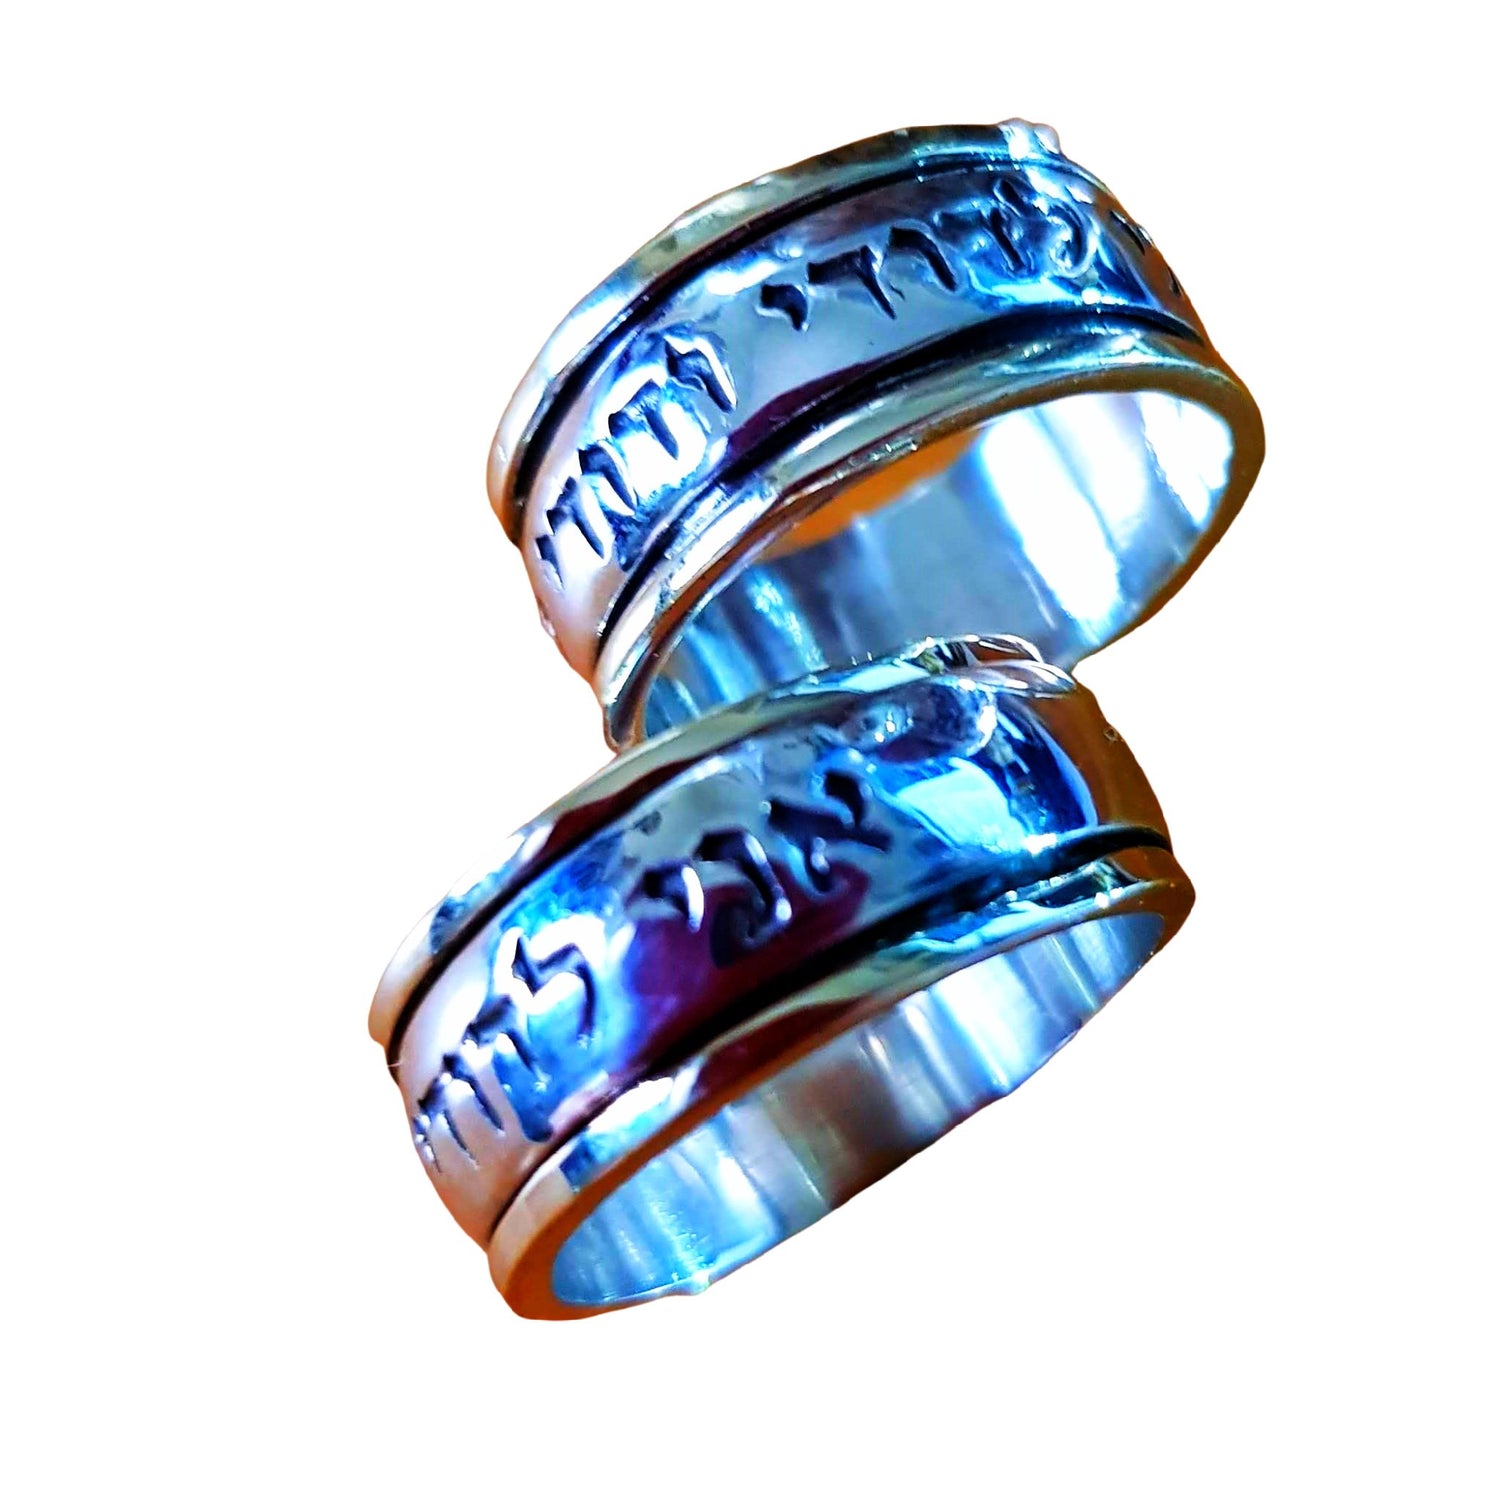 Bluenoemi Jewelry Personalized Rings Bluenoemi Israeli jewelry | Personalized Ring / message Hebrew verse blessing ring / Prayer ring Silver & Rose/Yellow  Gold 9KT